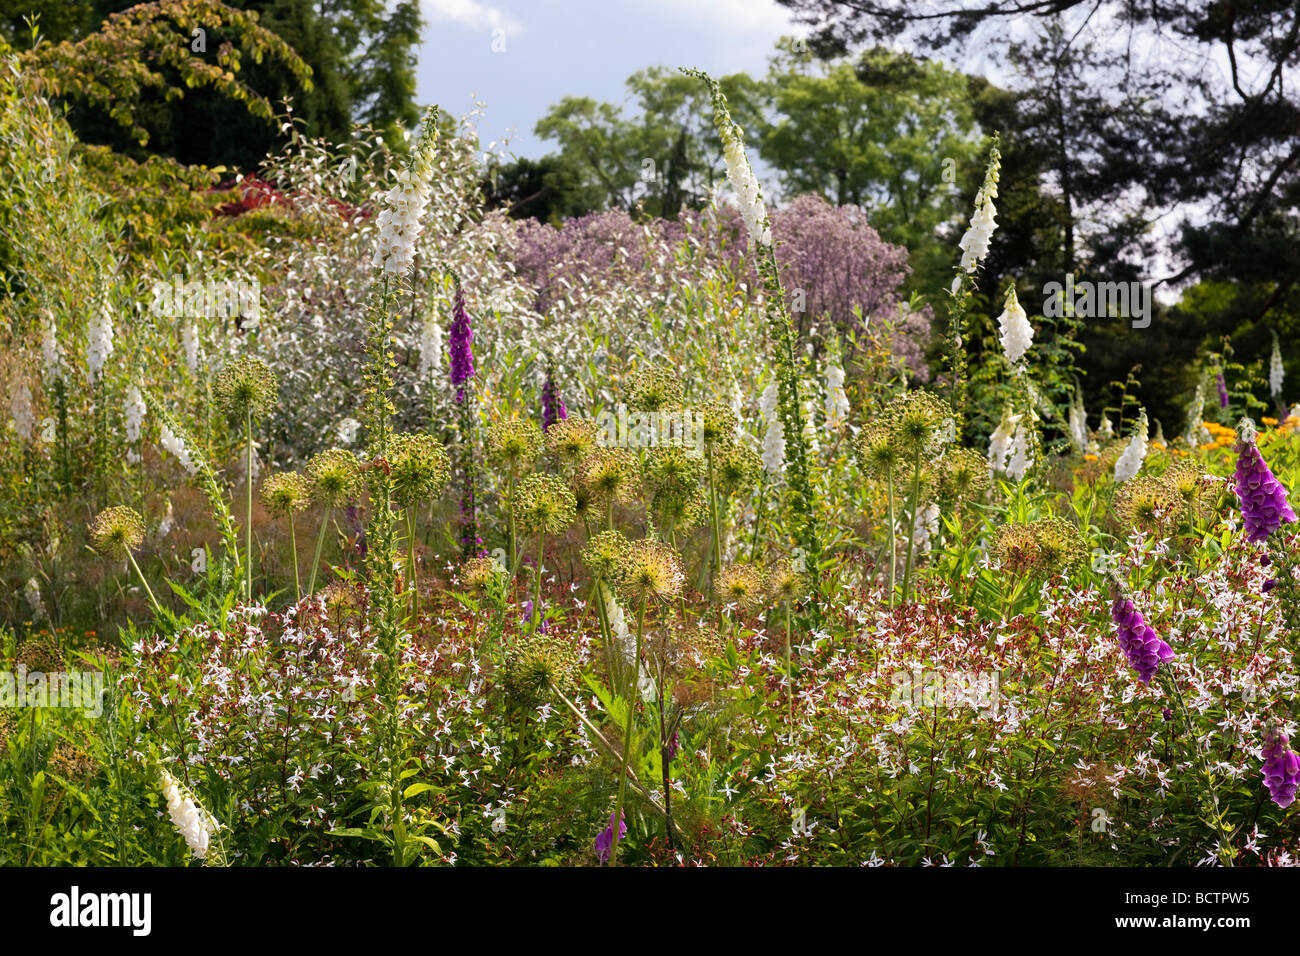 Allium seedheads and digitalis in a perennial border at RHS Harlow Carr Stock Photo